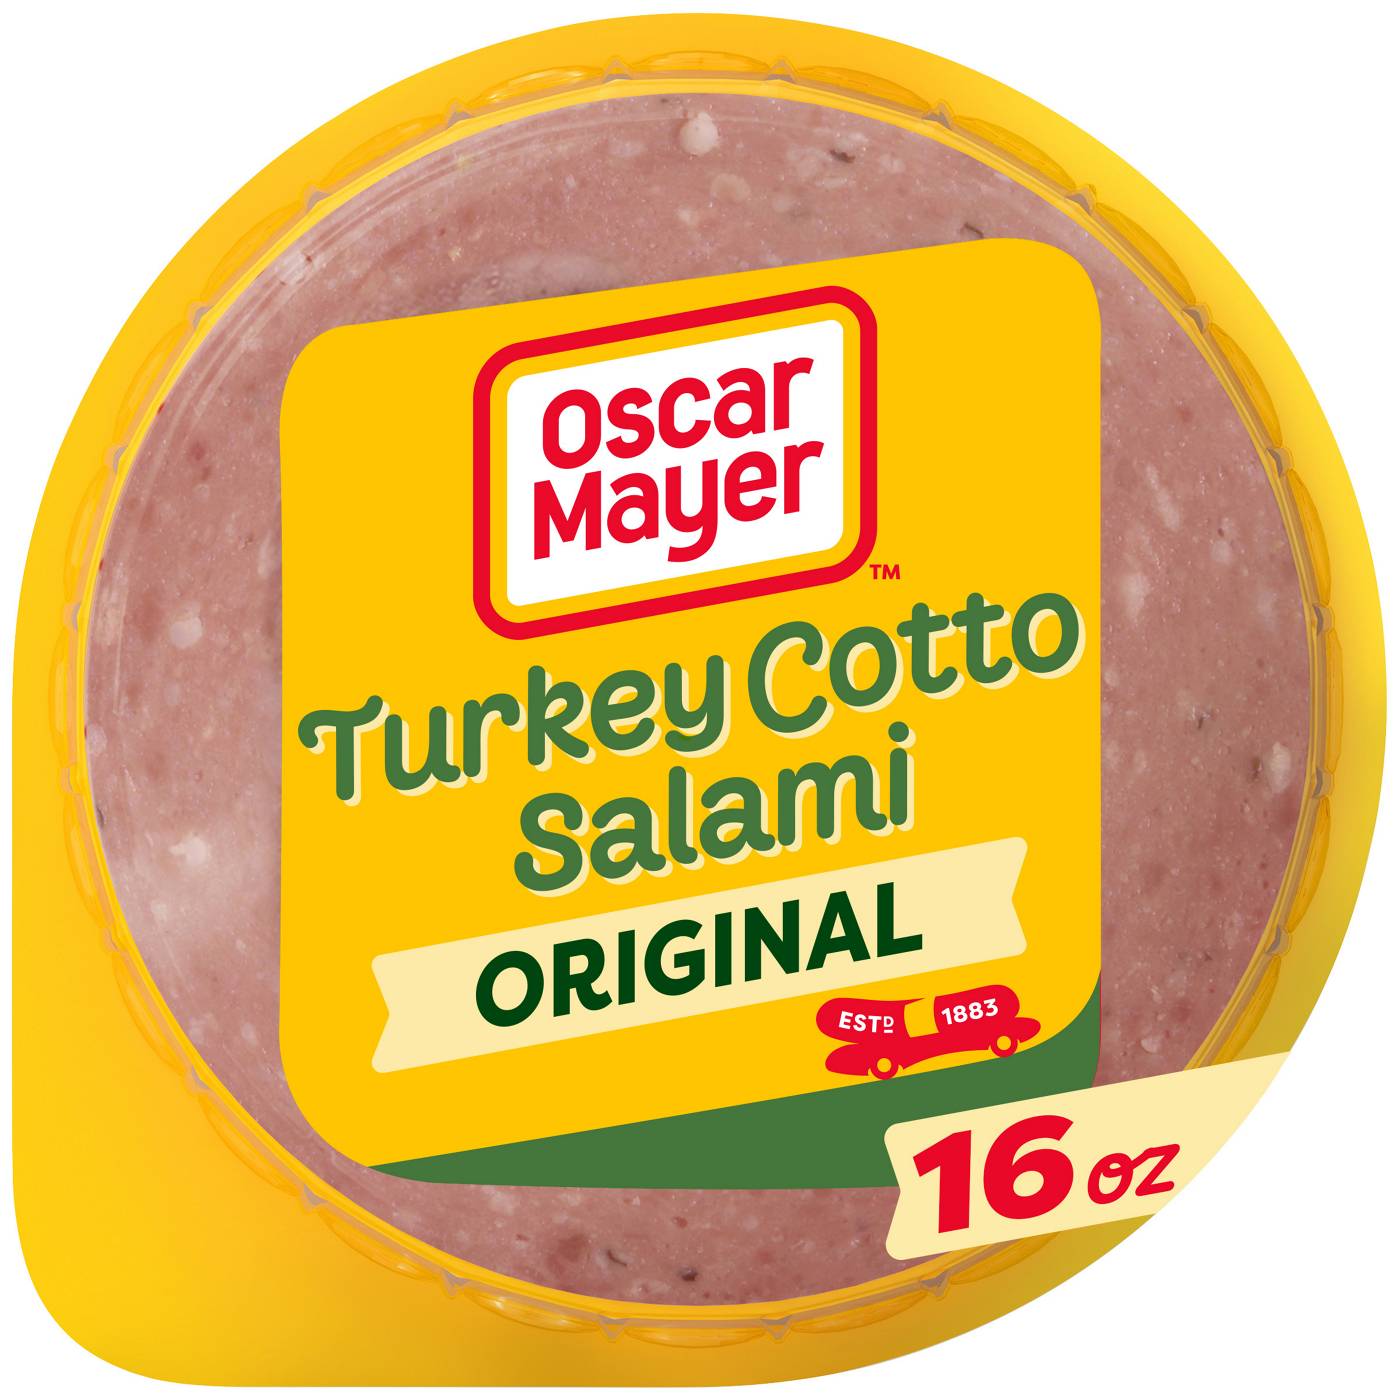 Oscar Mayer Turkey Cotto Salami Sliced Lunch Meat; image 1 of 4